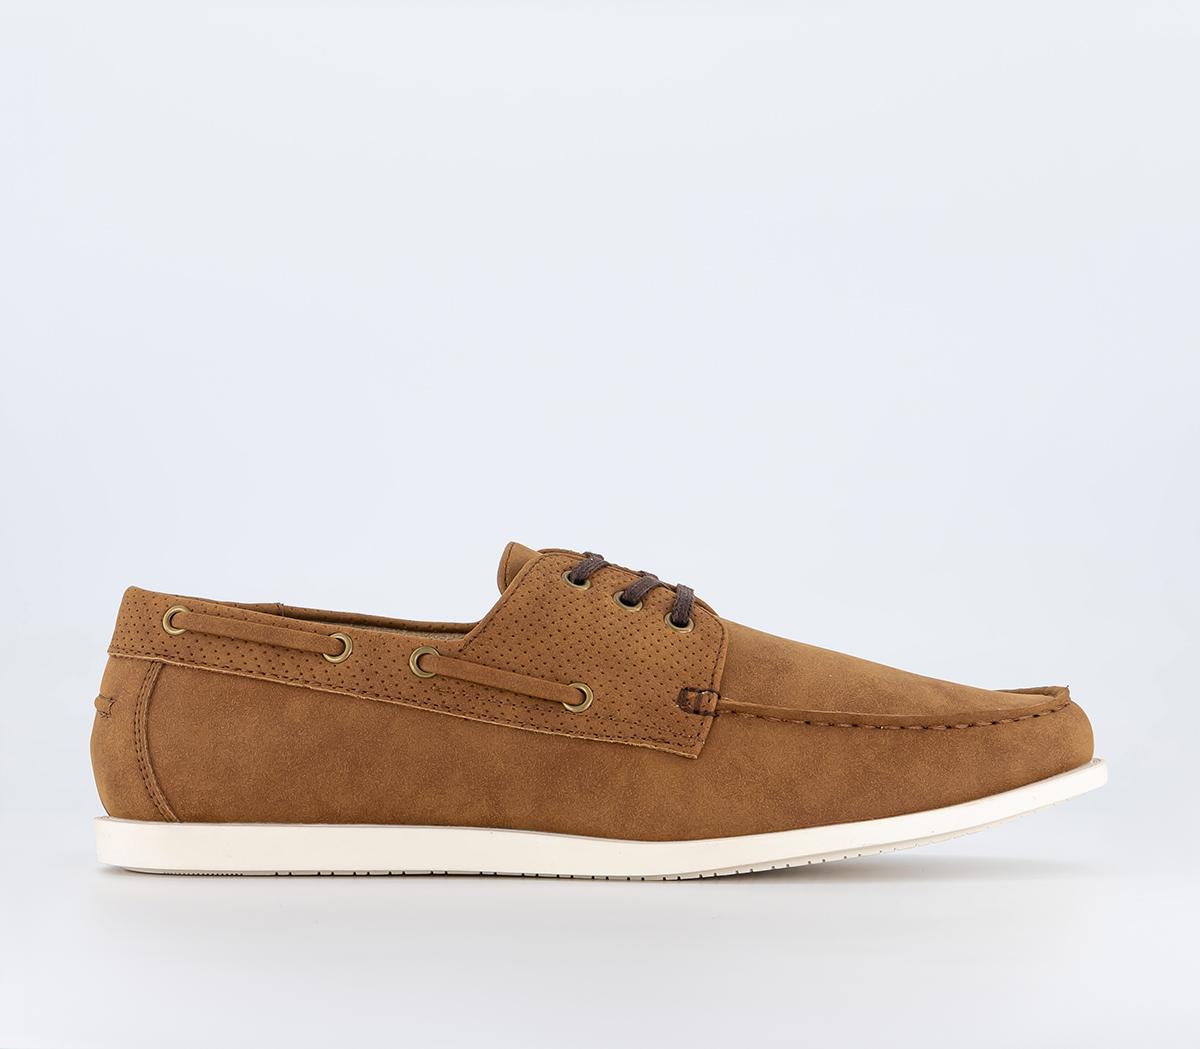 OFFICE Creed Boat Shoes Tan - Men's Casual Shoes